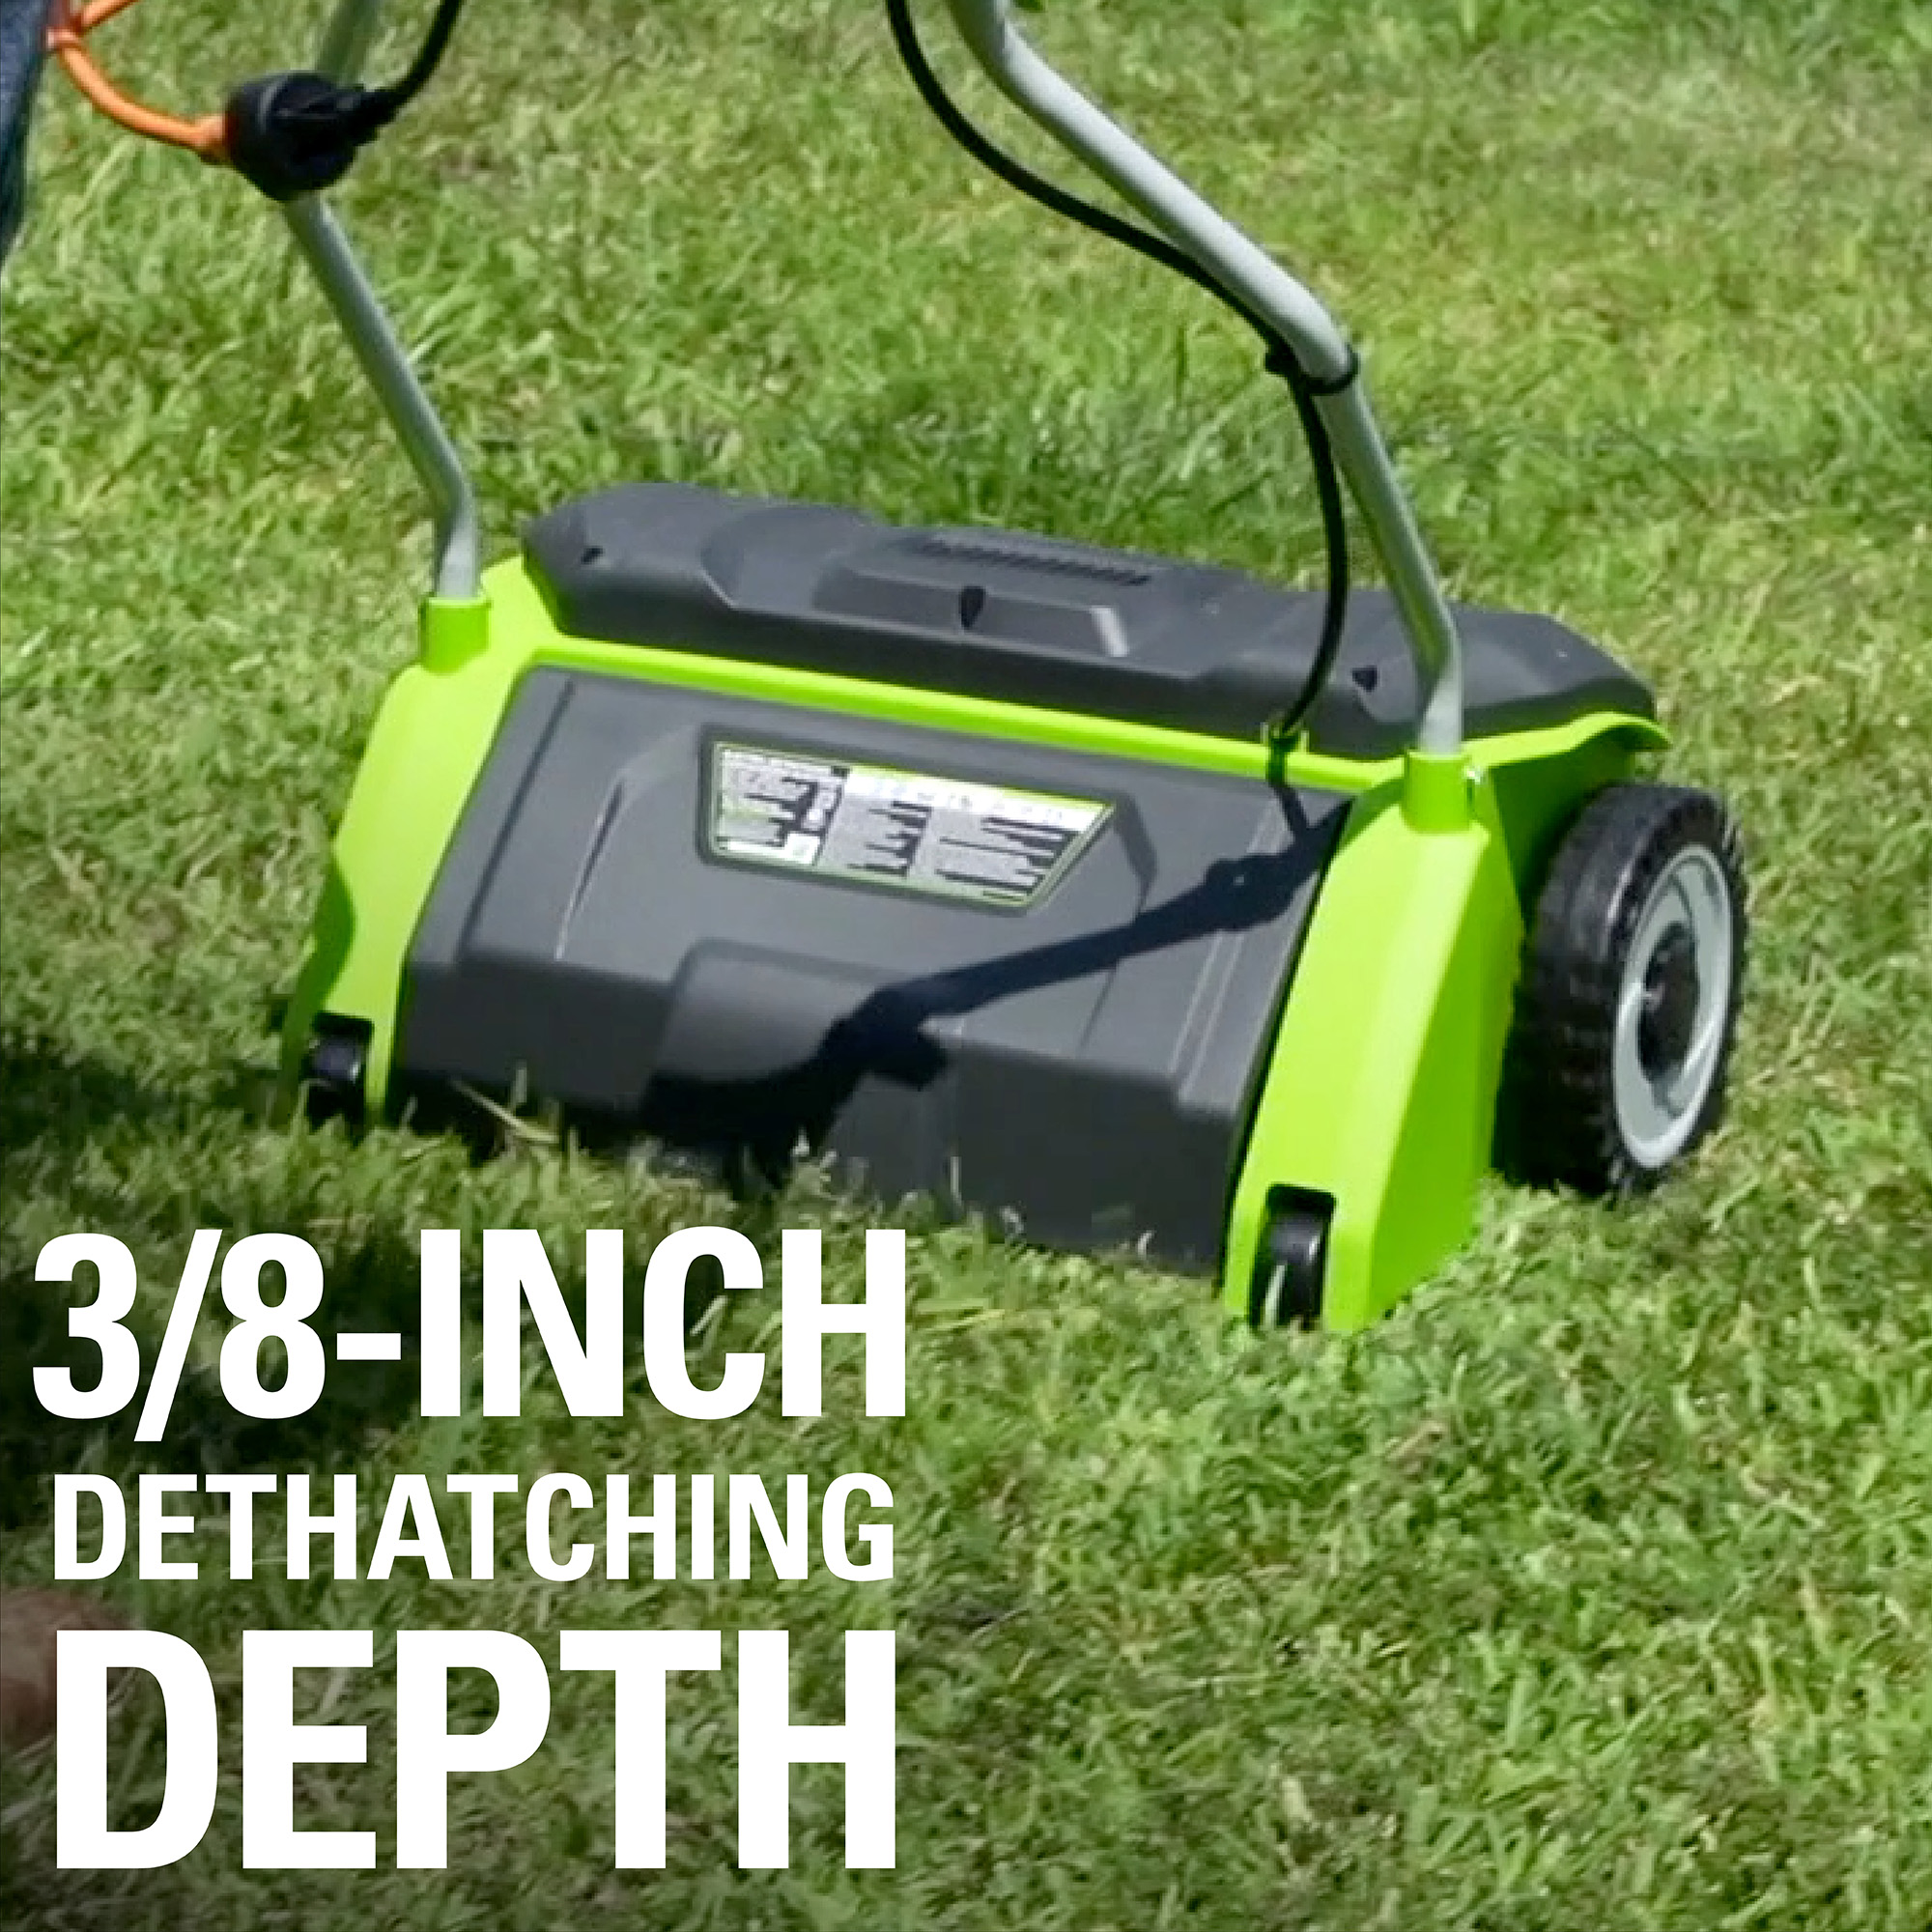 Greenworks 14 in. 10 Amp Corded Electric Dethatcher, DT14B00 - image 9 of 12